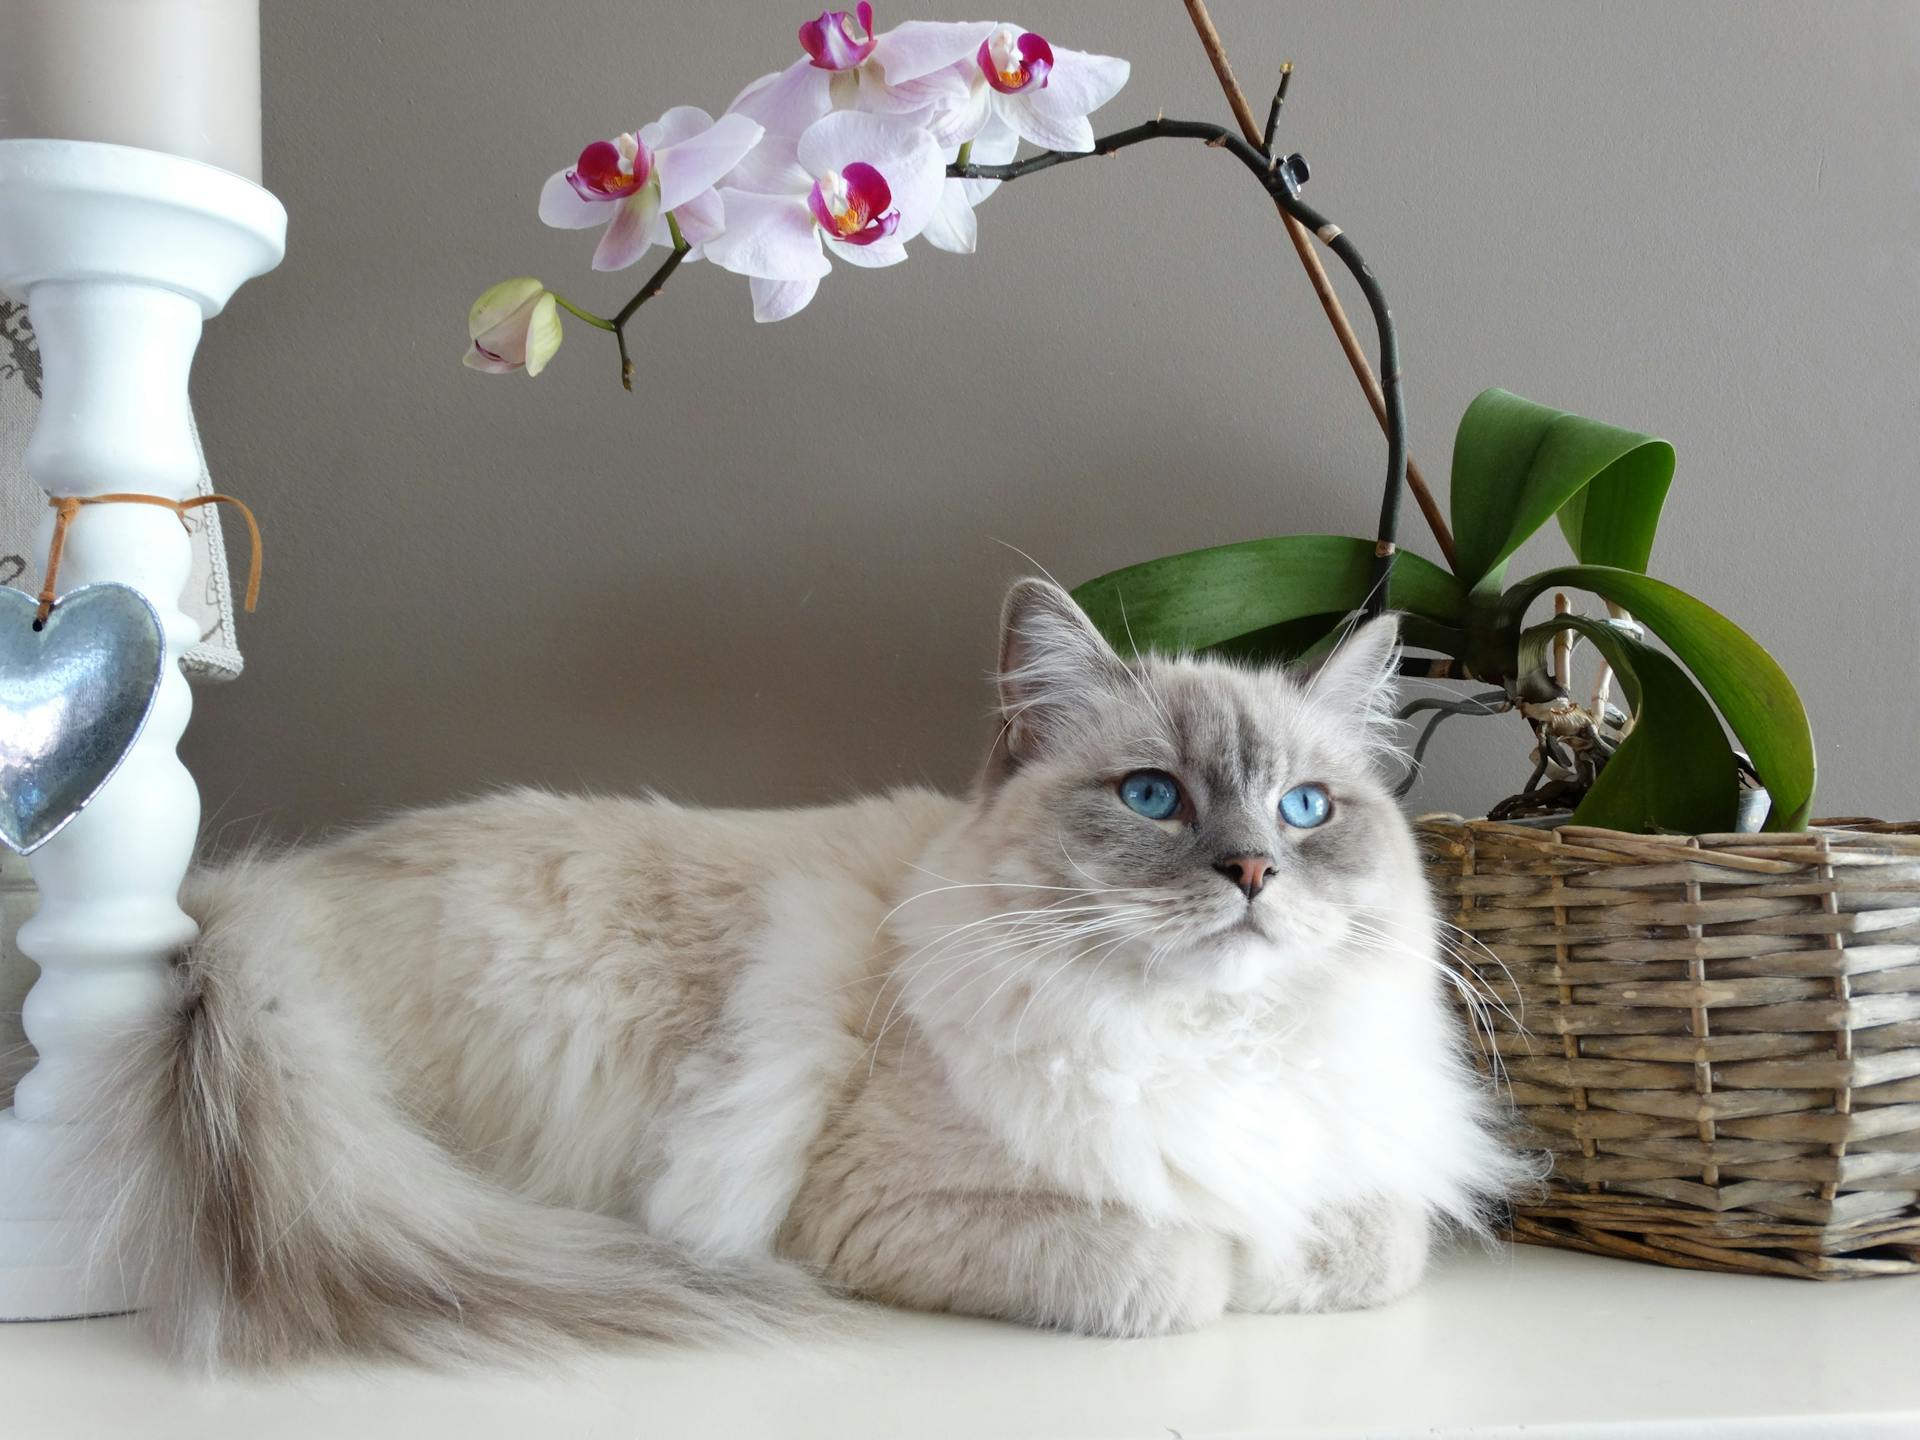 A white cat sitting indoors besides flowers and a wicker basket